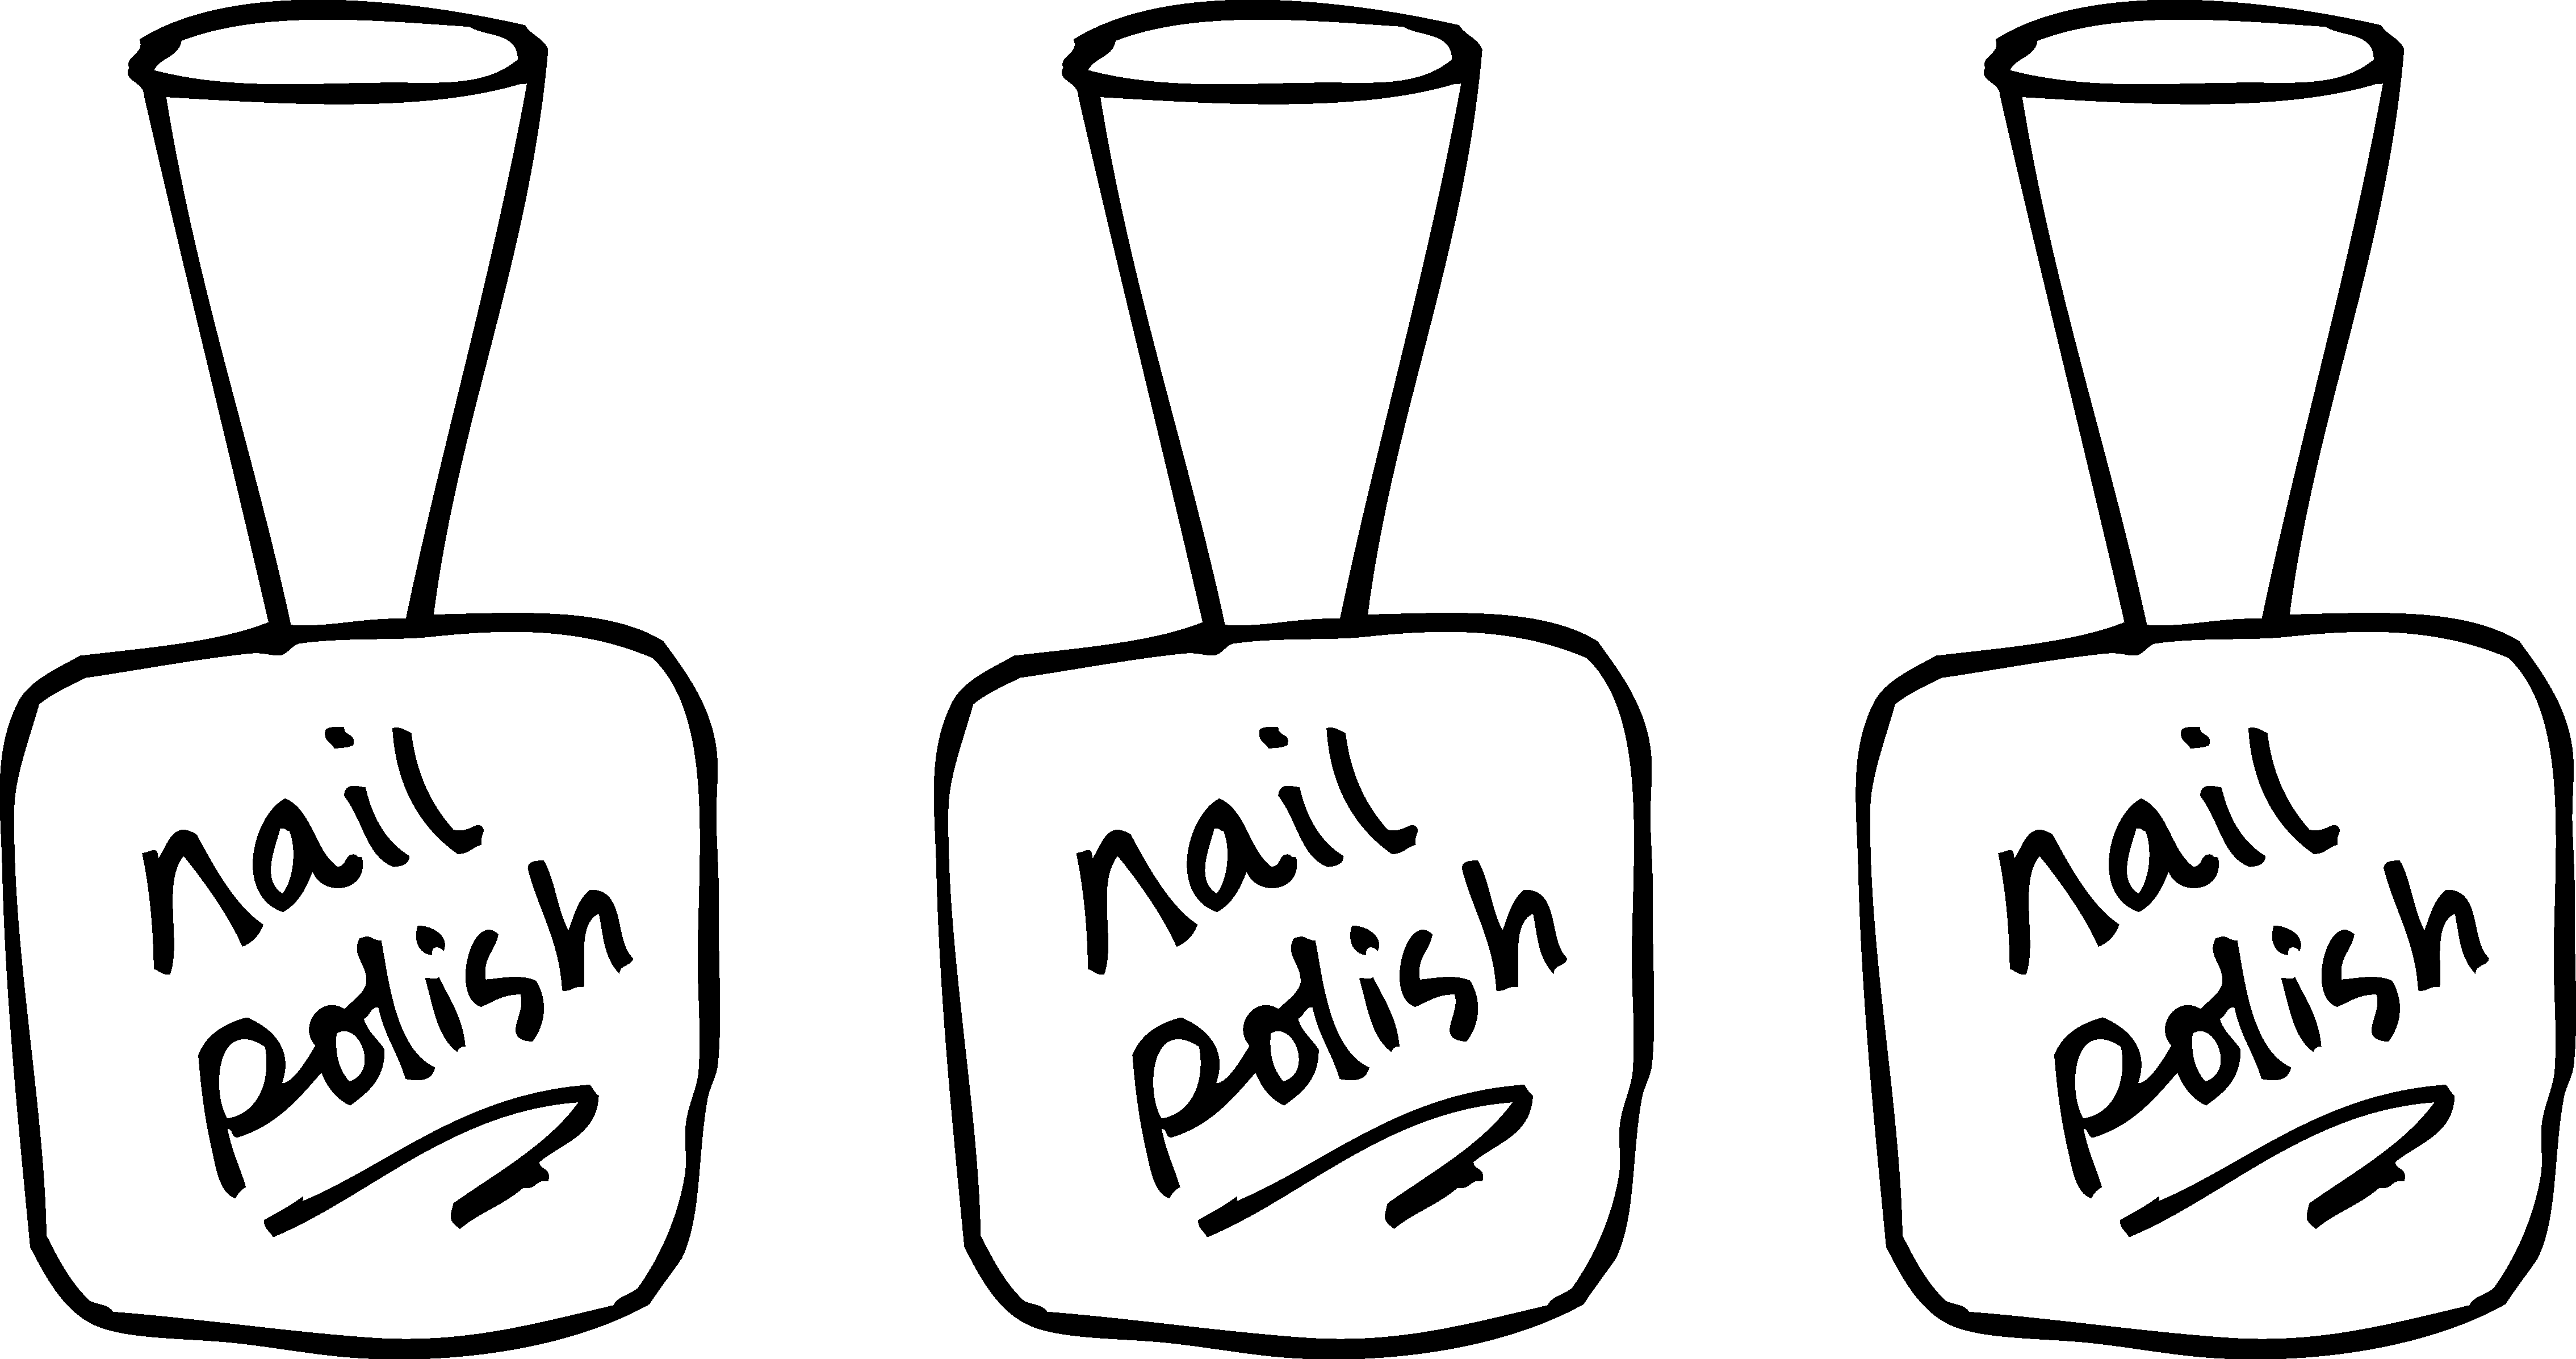 6. Nail Polish Bottle Coloring Page - Coloring Book - wide 5